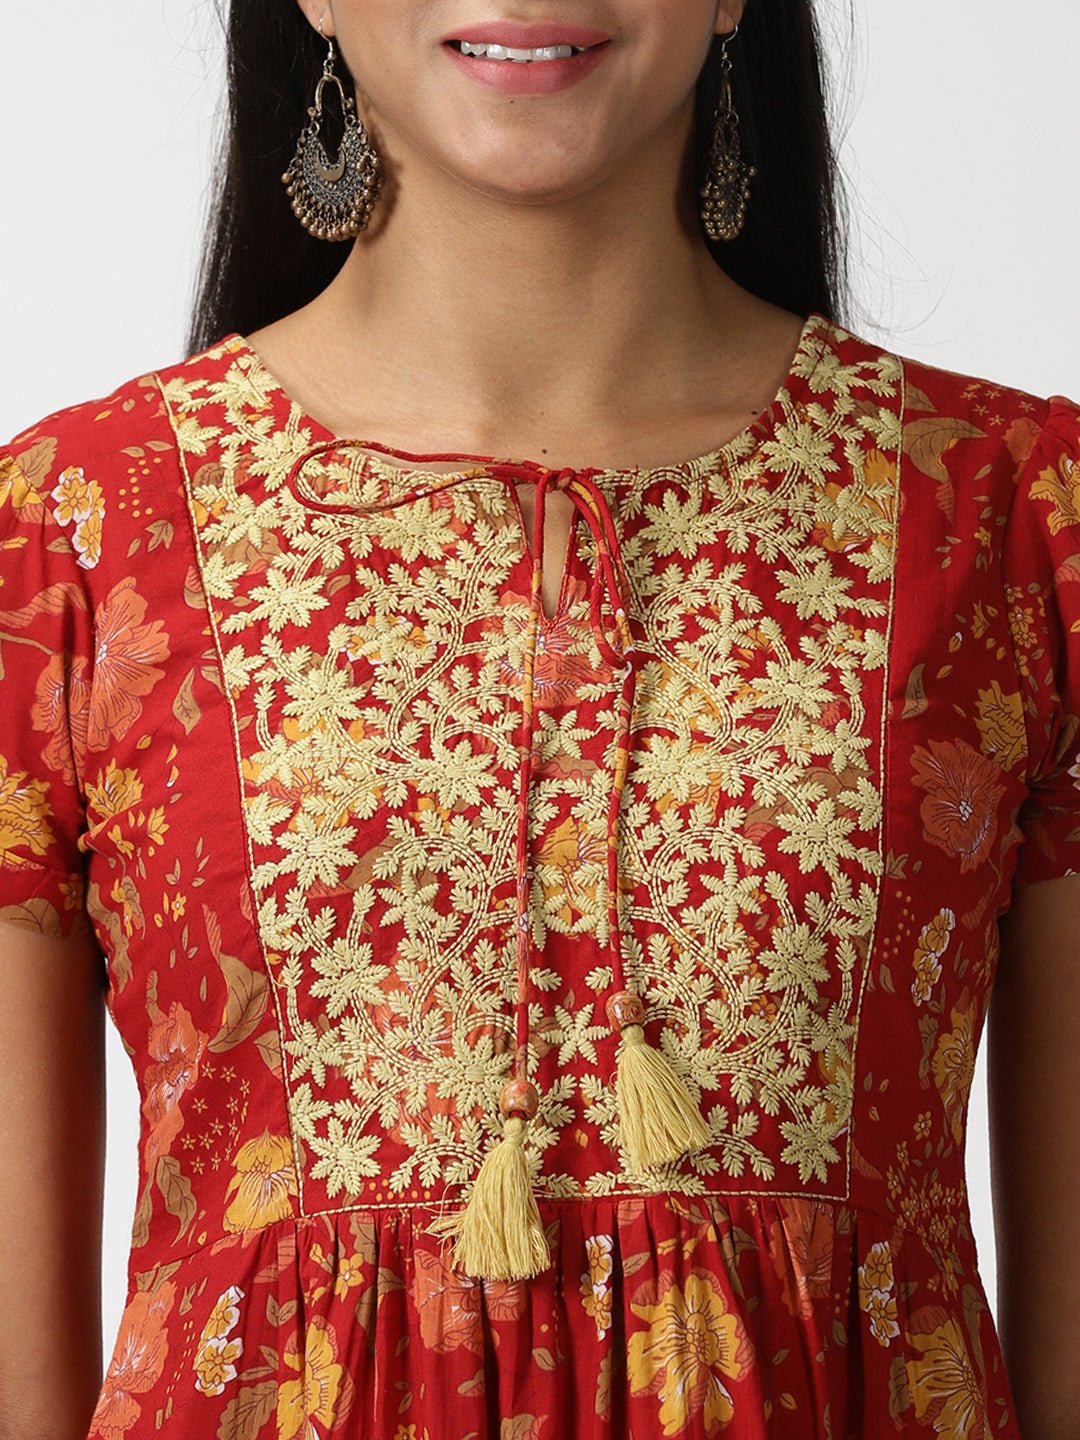 Red Floral Printed A-line Midi Dress with Yoke Embroidery